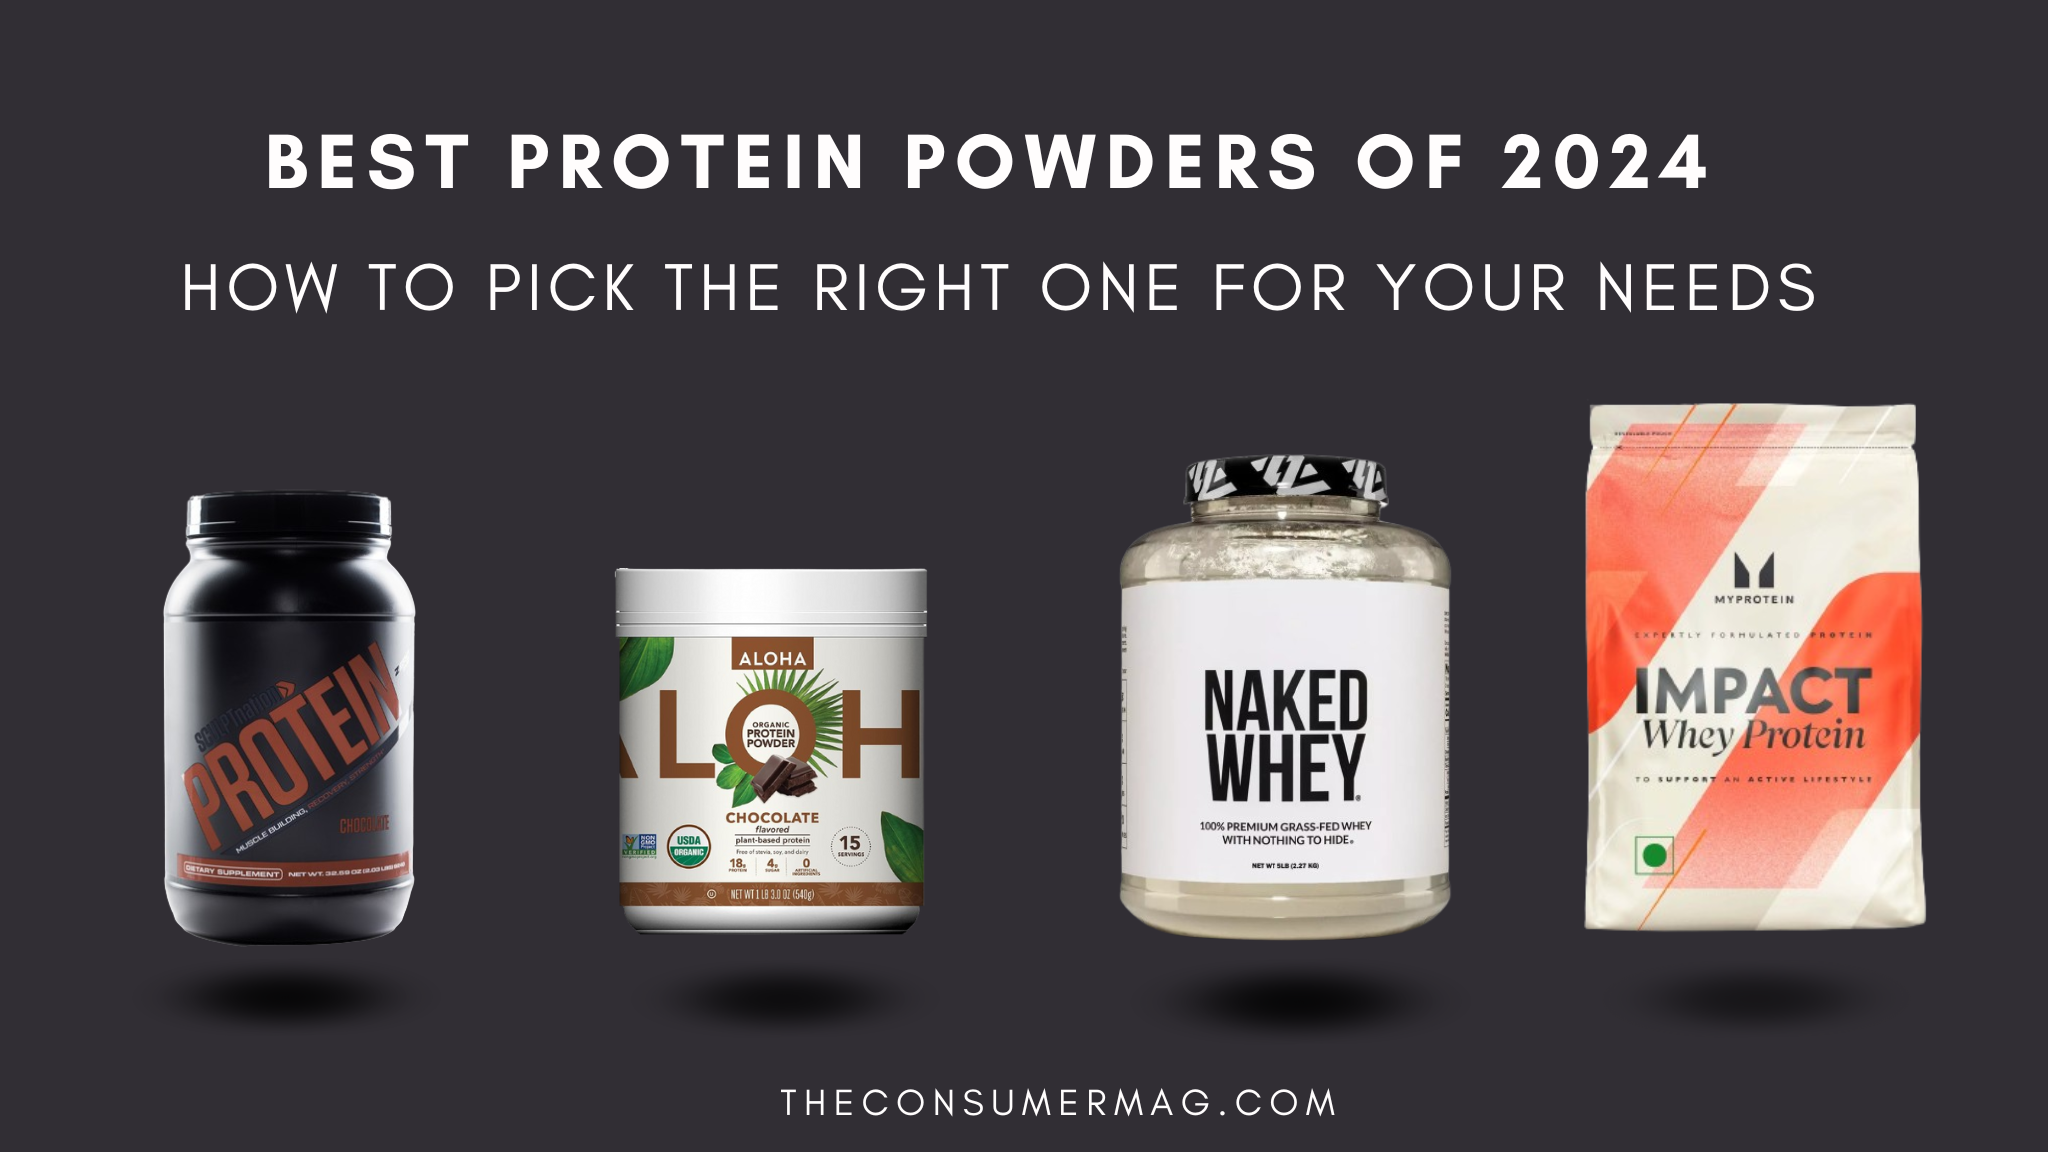 Best Protein Powders of 2024: How to Pick the Right One for Your Needs